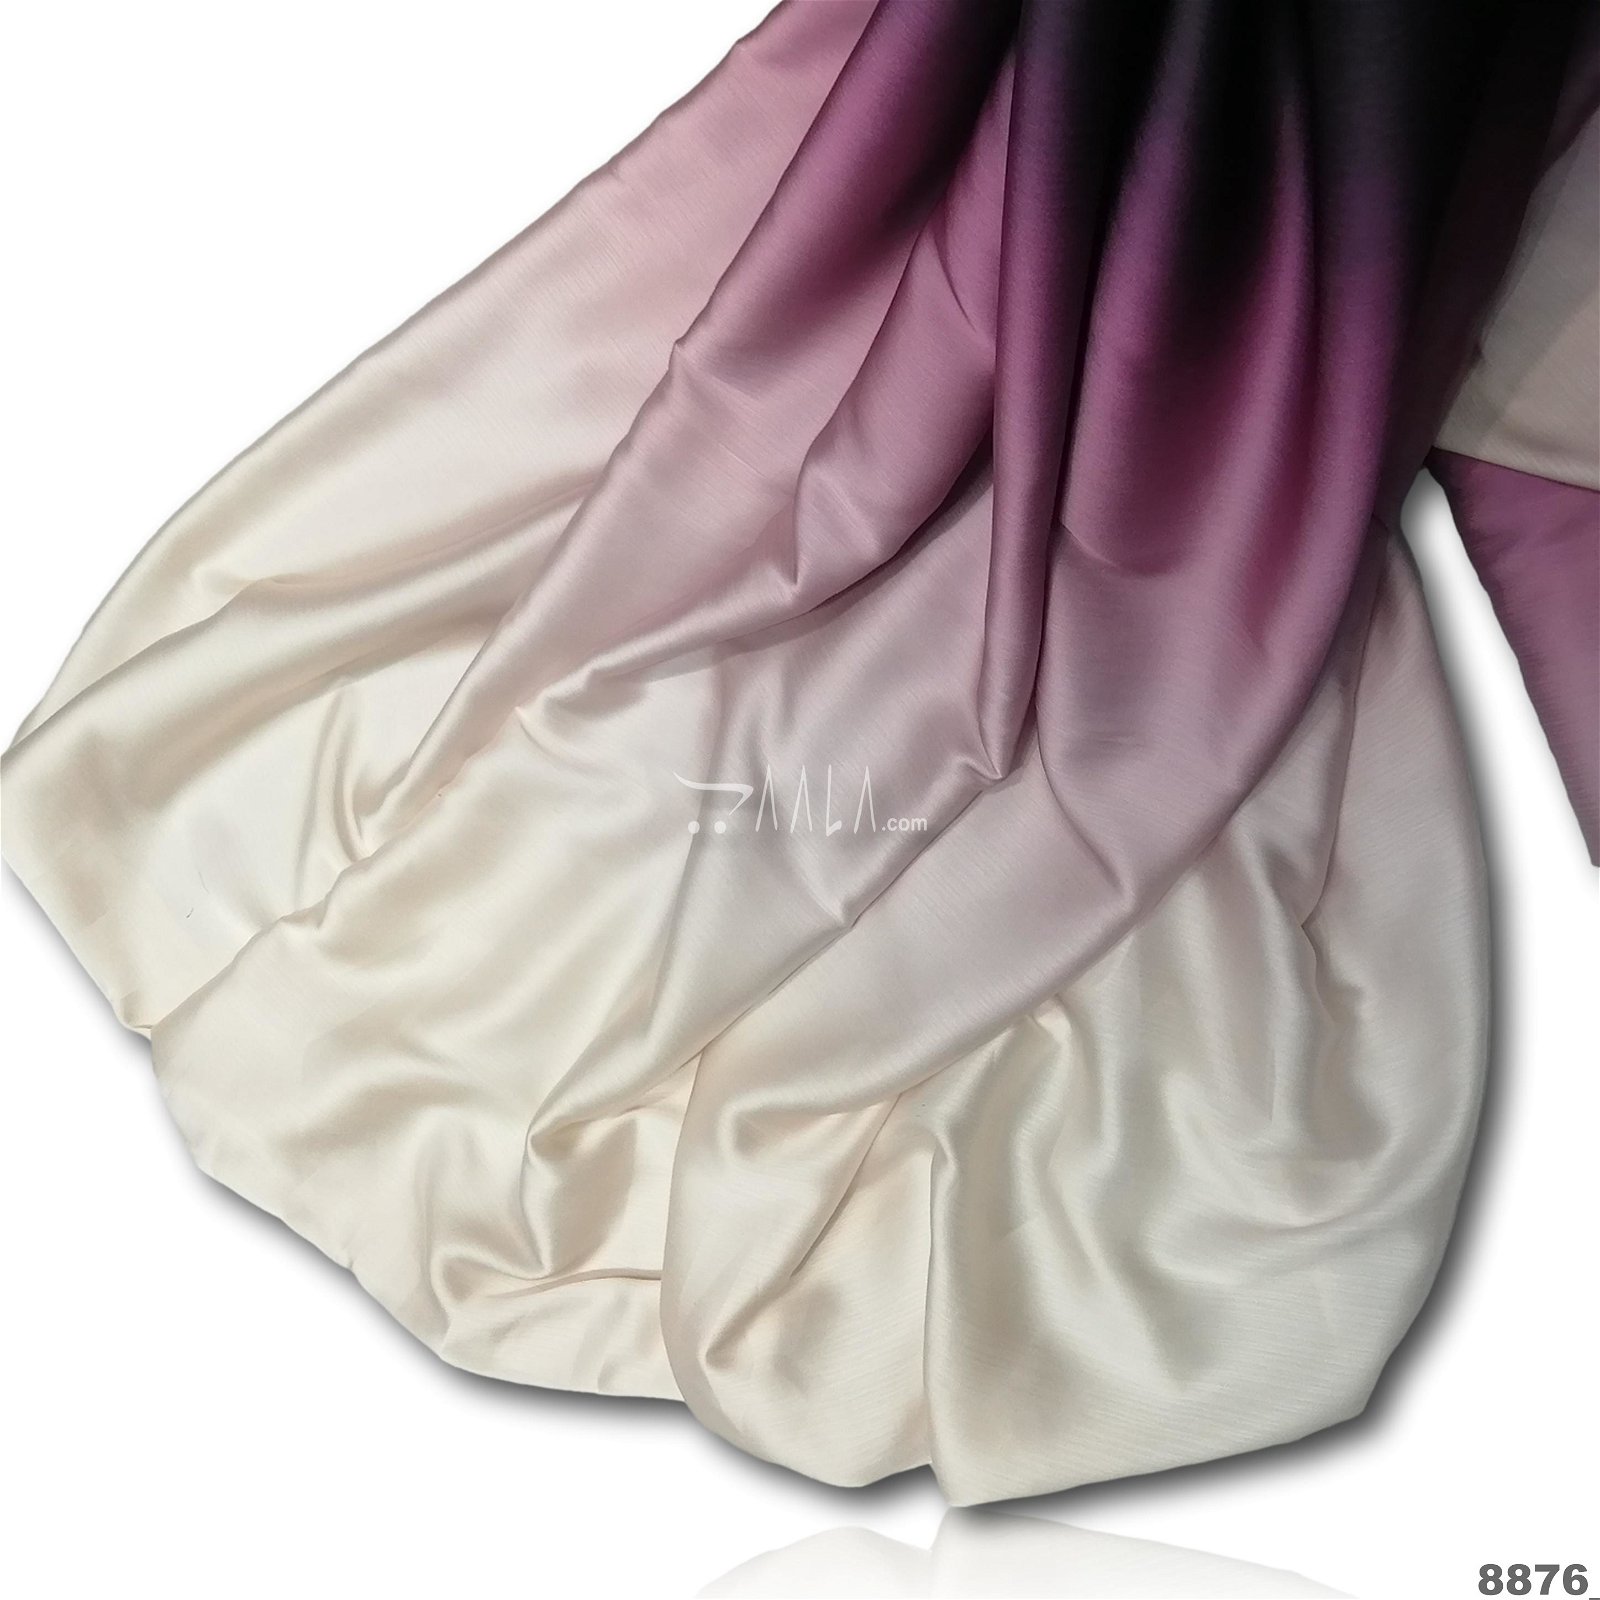 Shaded Satin-Chiffon Poly-ester 44-Inches ASSORTED Per-Metre #8876